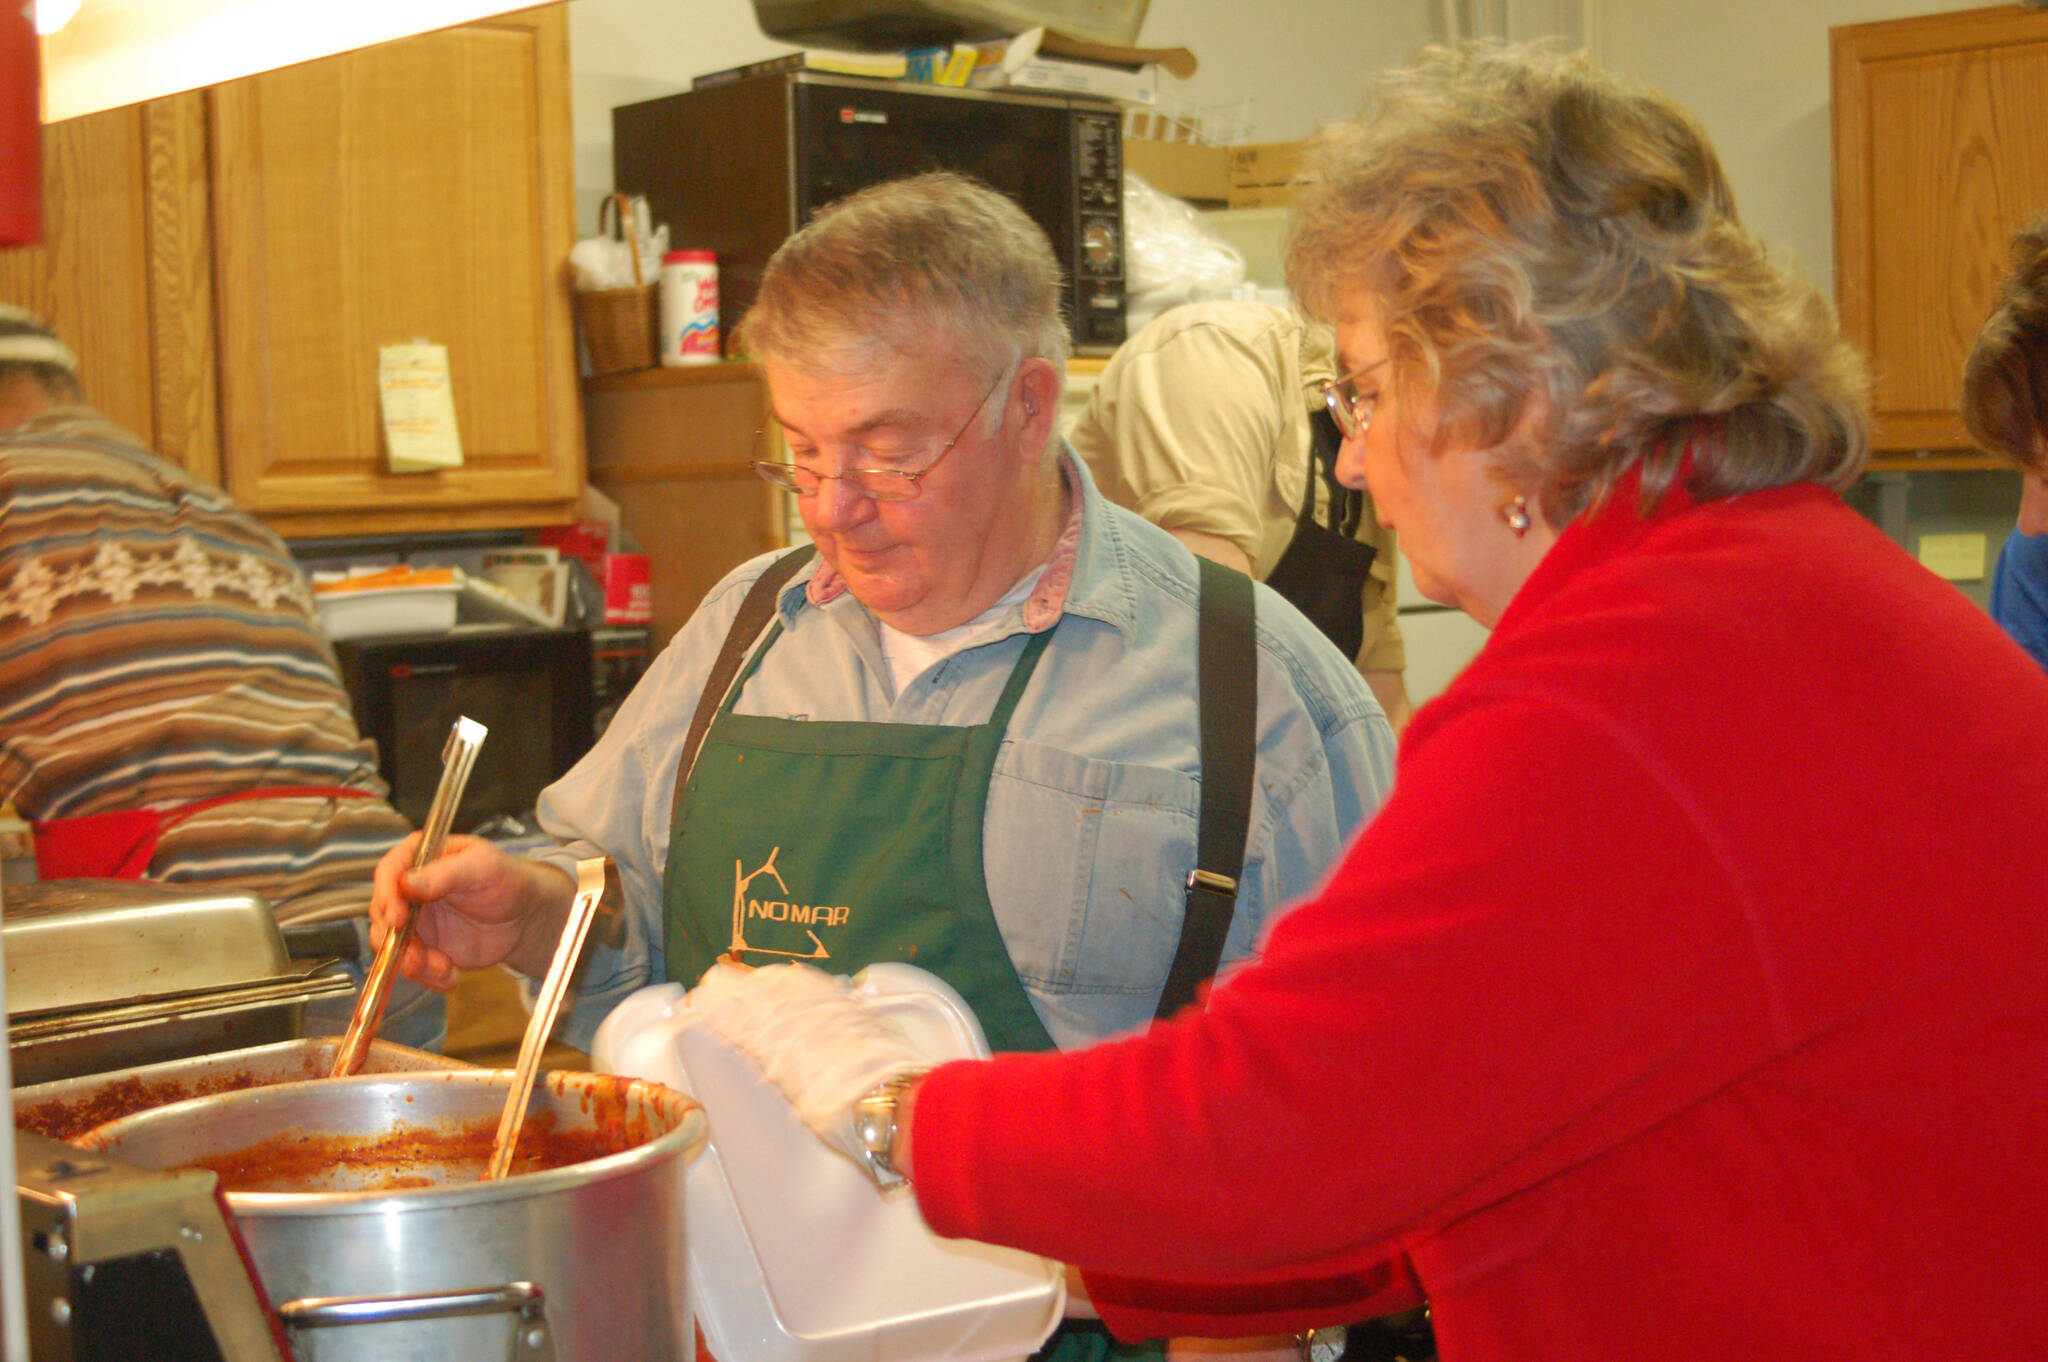 File photo by Michael Armstrong / Homer News
Ben Mitchell, left, serves spaghetti to helper Pat Wells in the kitchen at a past Share the Spirit spaghetti feed.